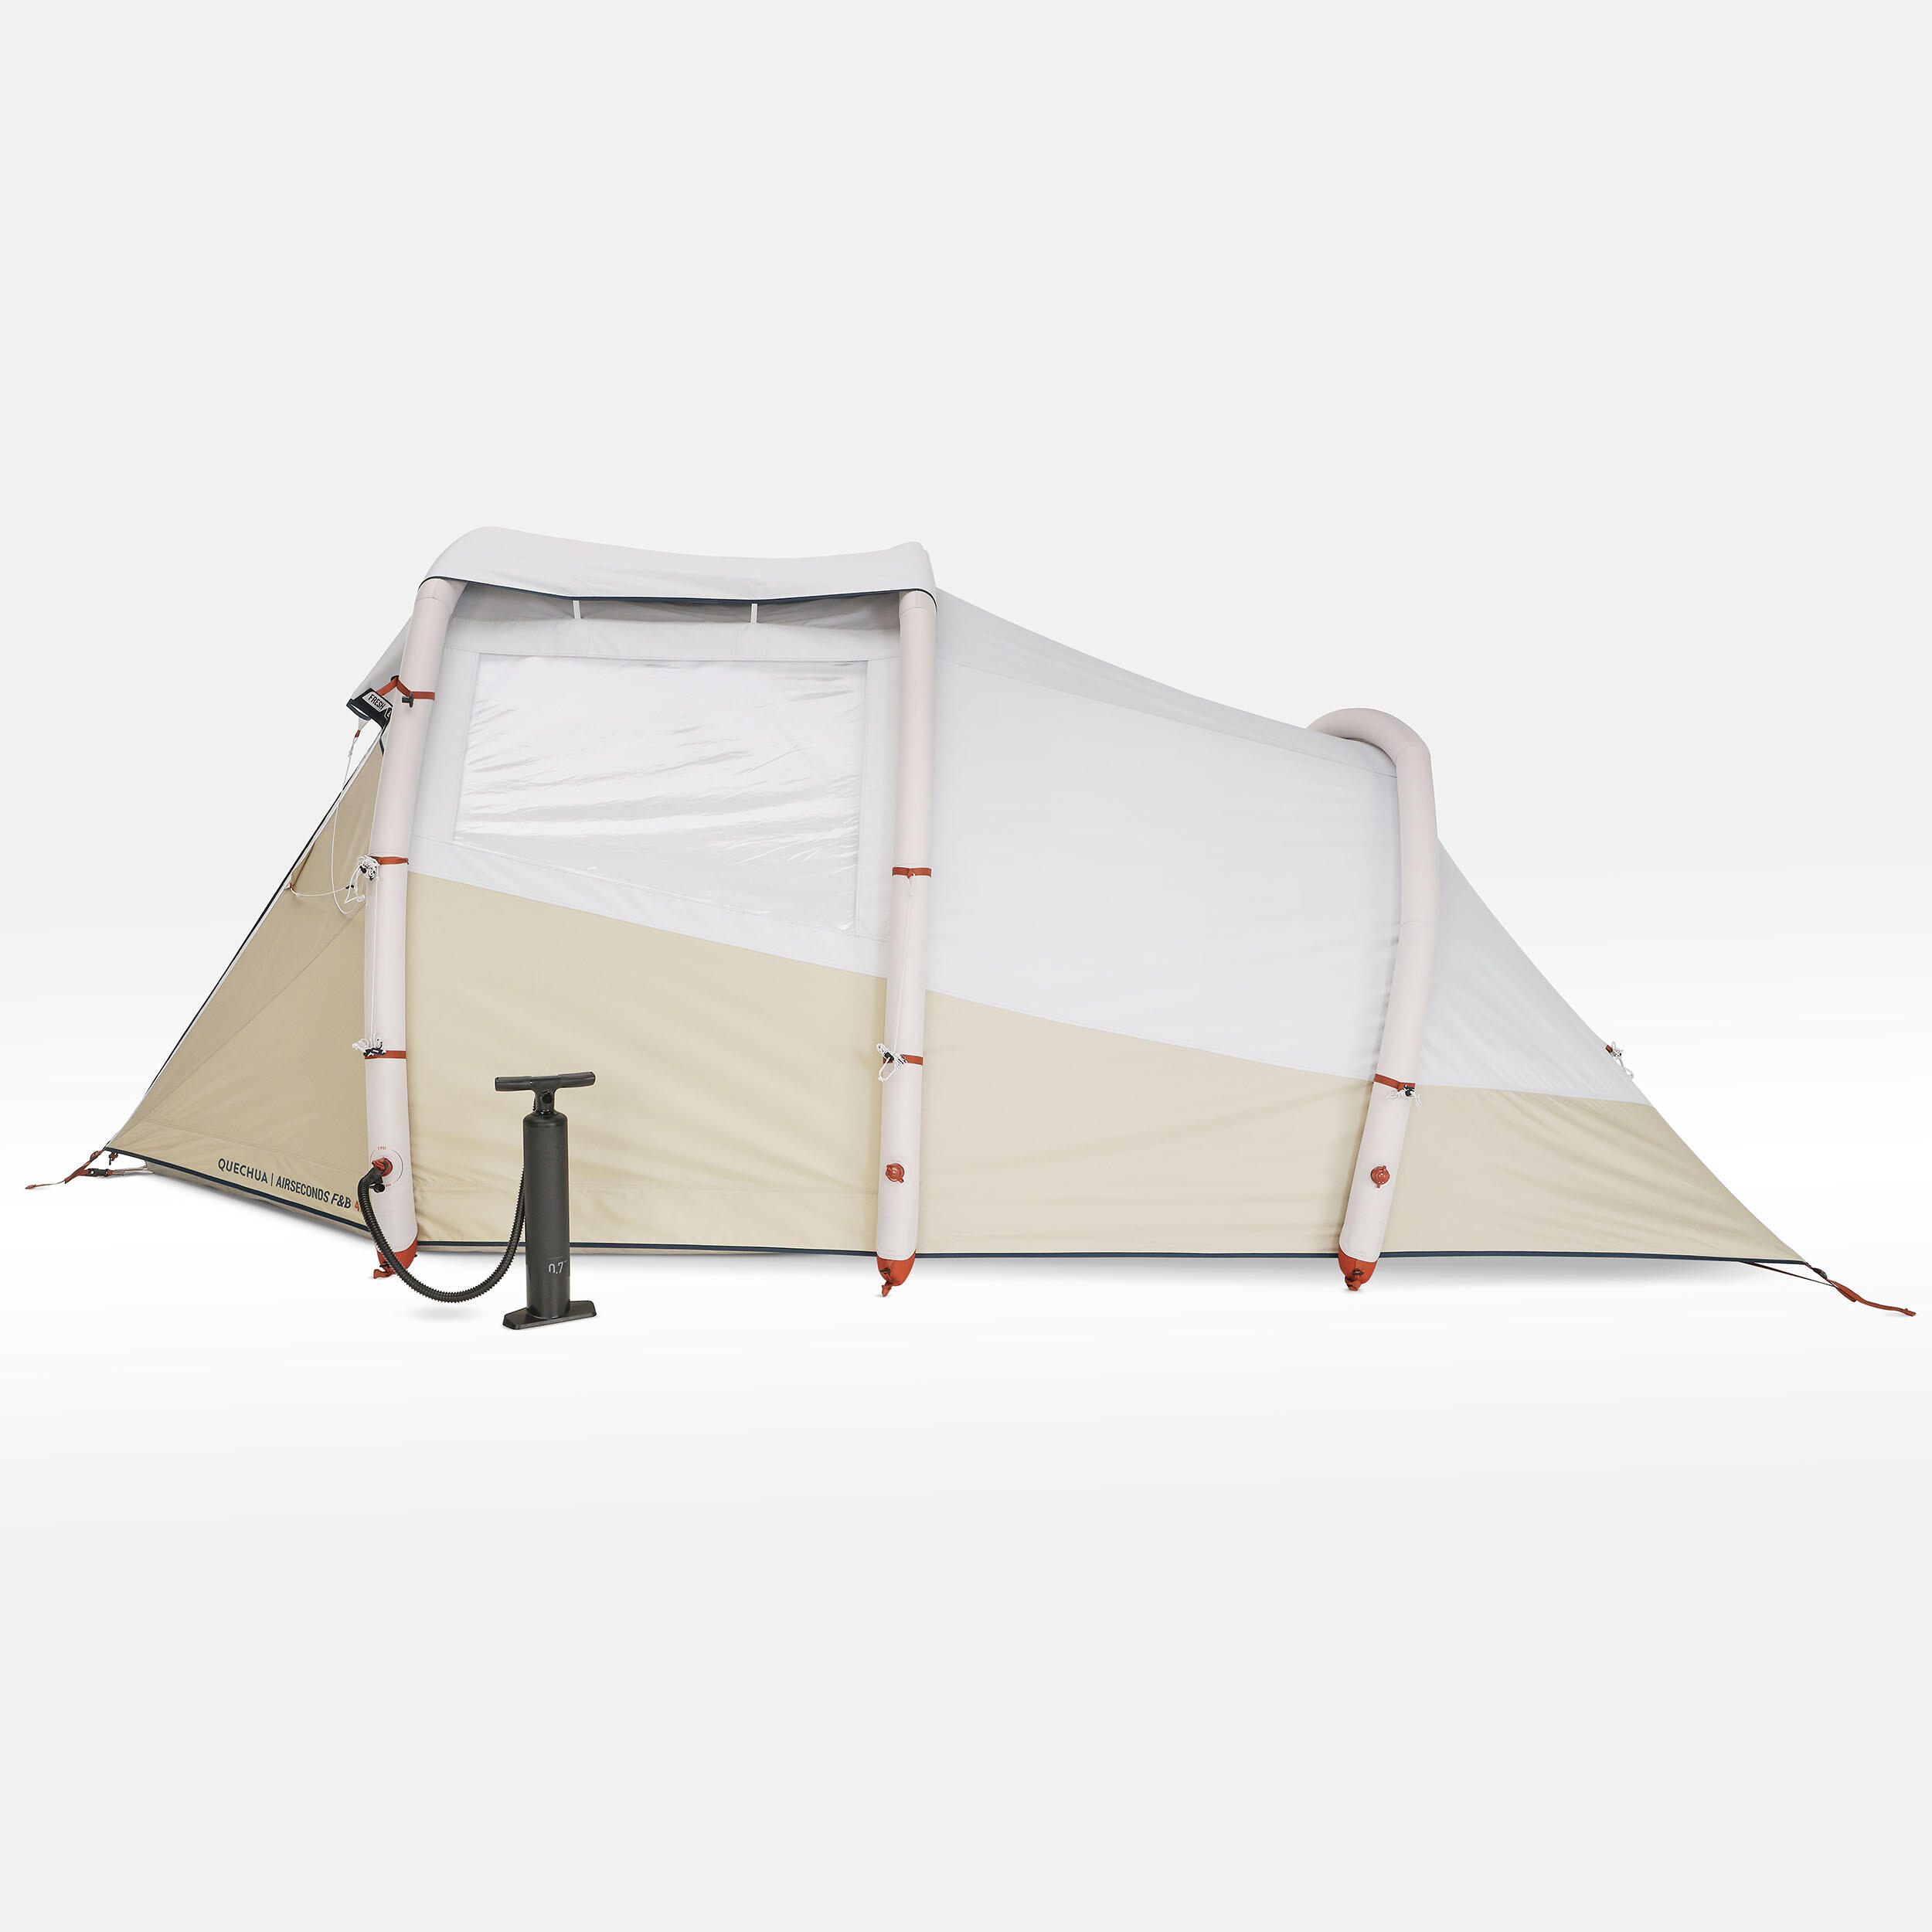 4 Man Inflatable Blackout Tent - Air Seconds 4.1 F&B 30/32